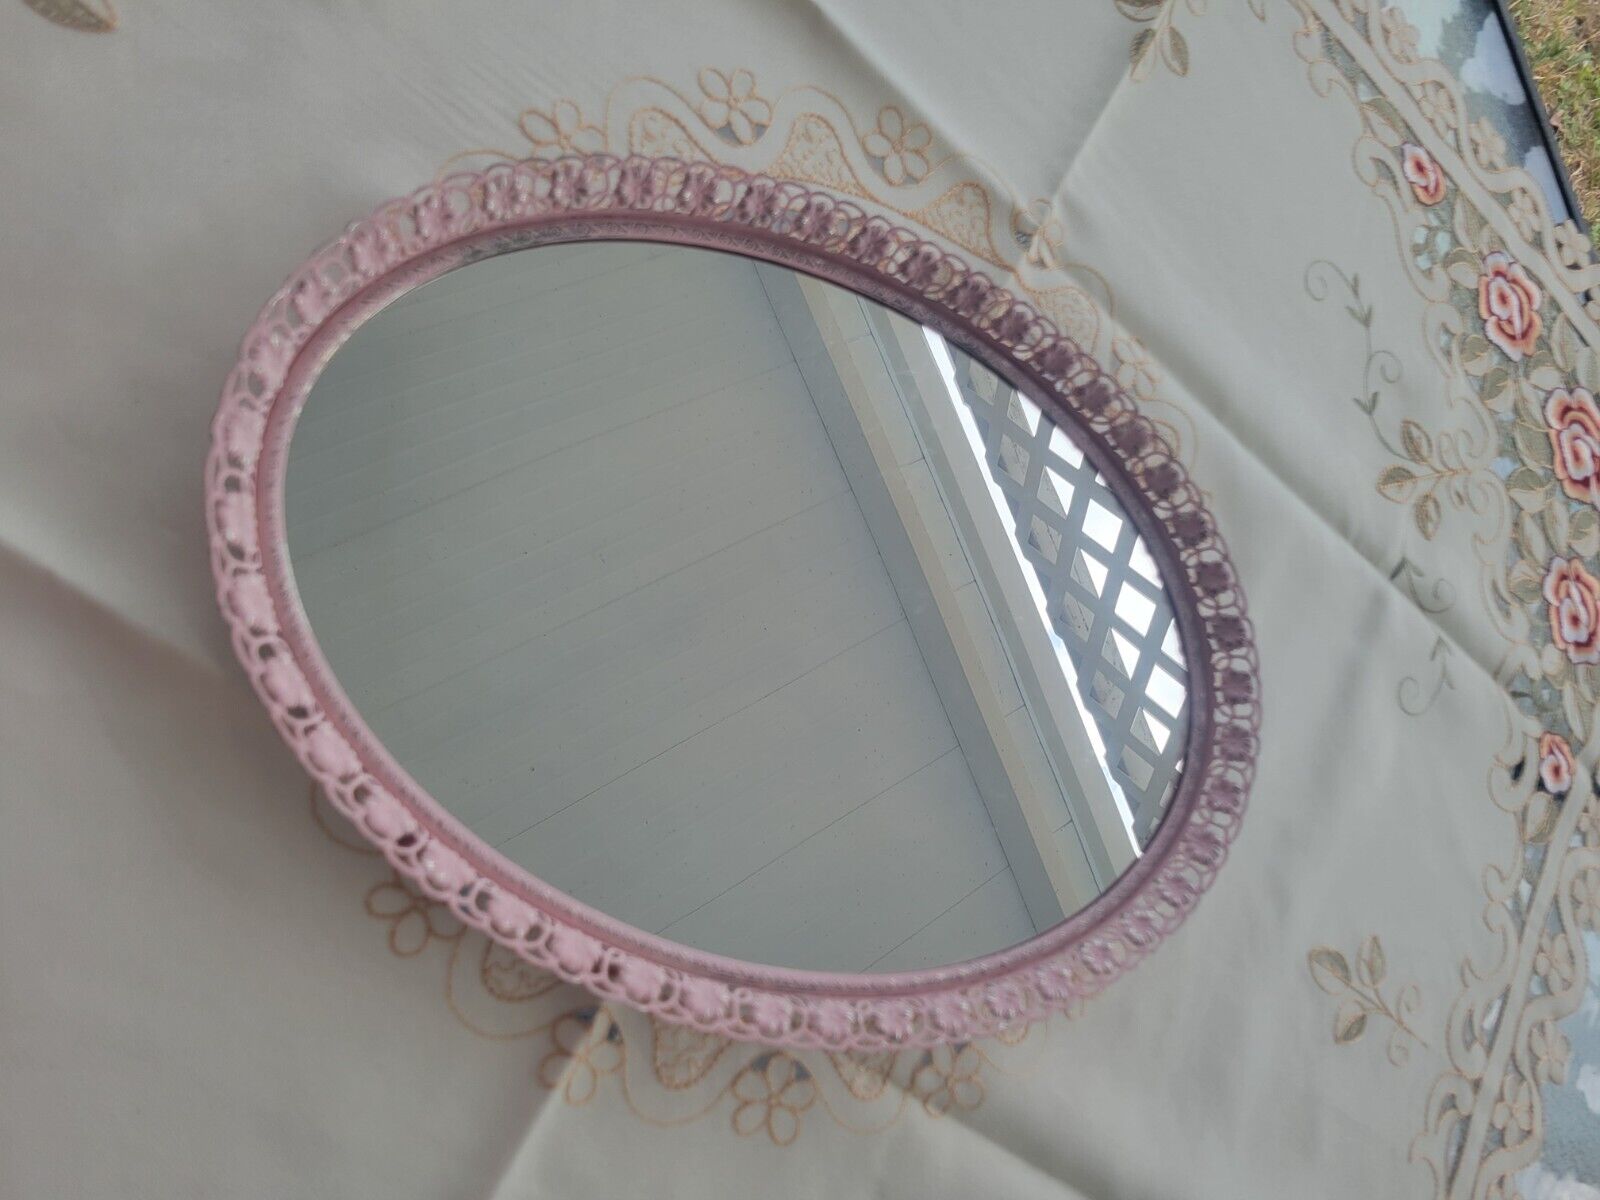 VTG Oval Vanity Mirror Tray Upcycled Metal Filigree Ballet Pink Paint on Silver 